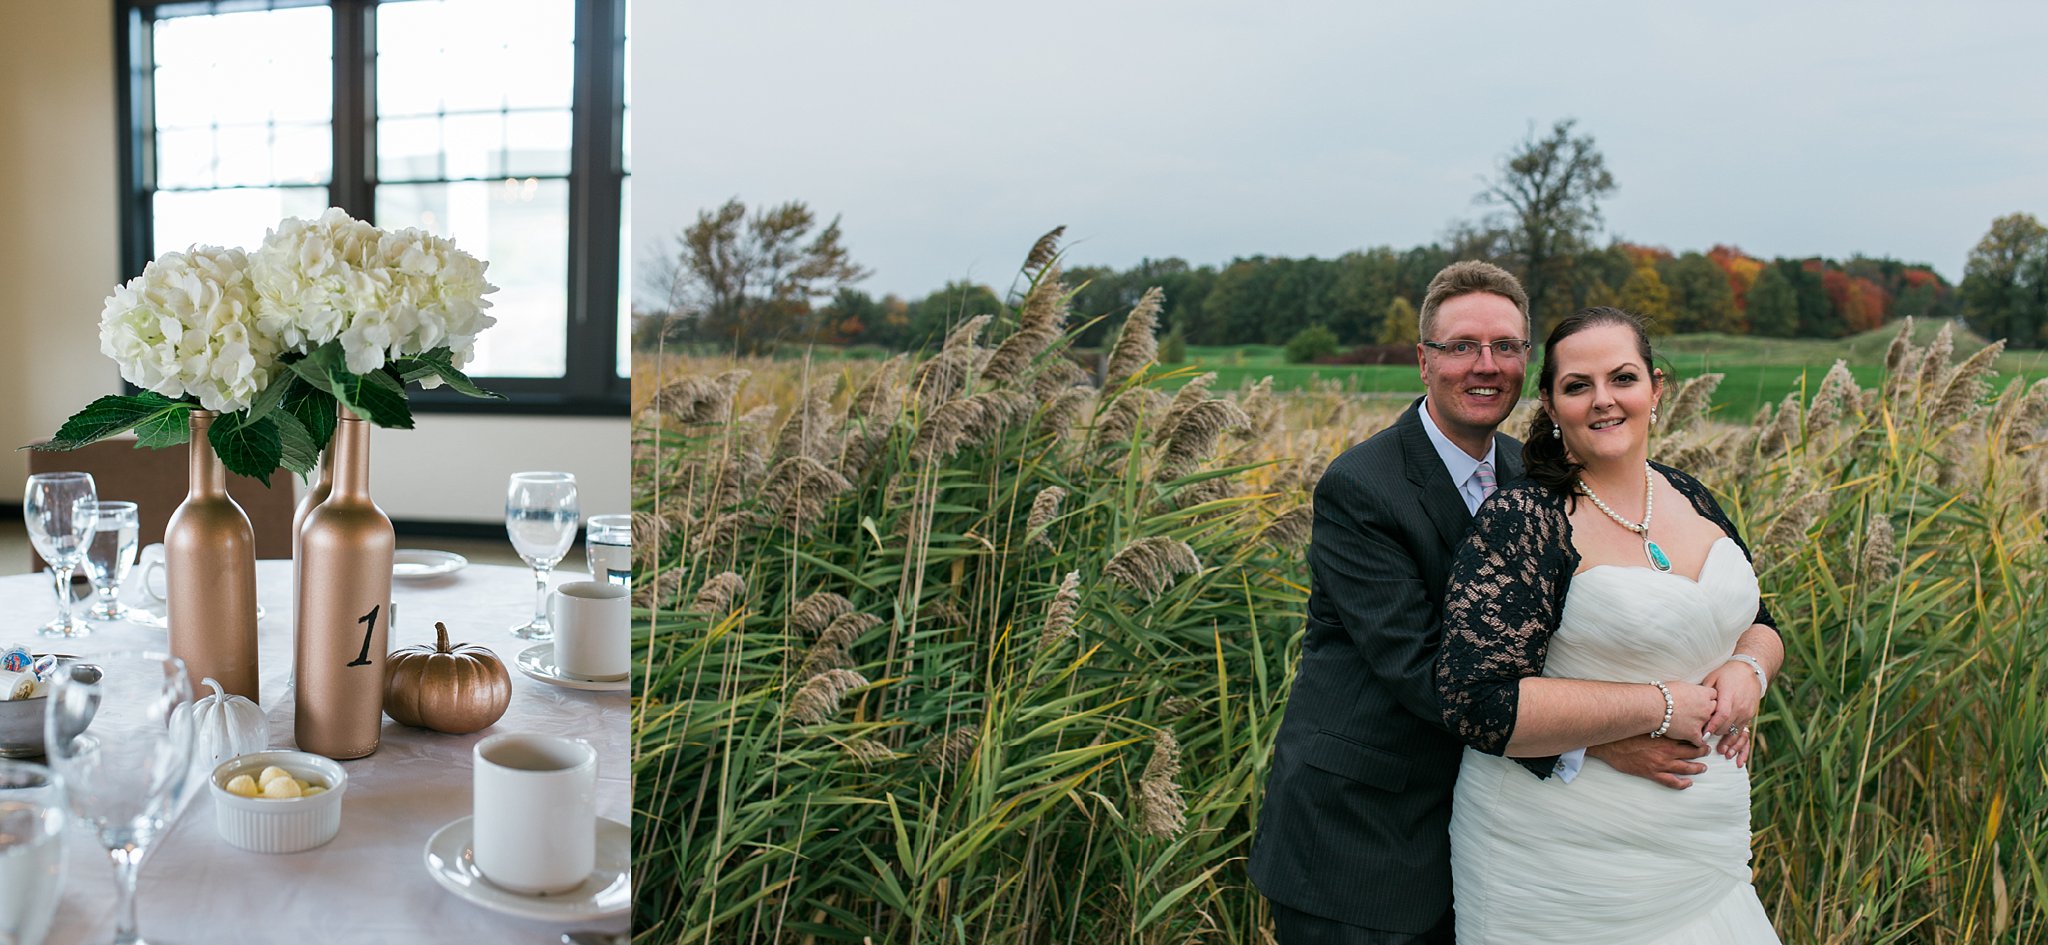 Jennifer Blaak Photography, Toronto Wedding Photographer, Pipers Heath Golf Club in Milton, Bride and groom in long grass, table details